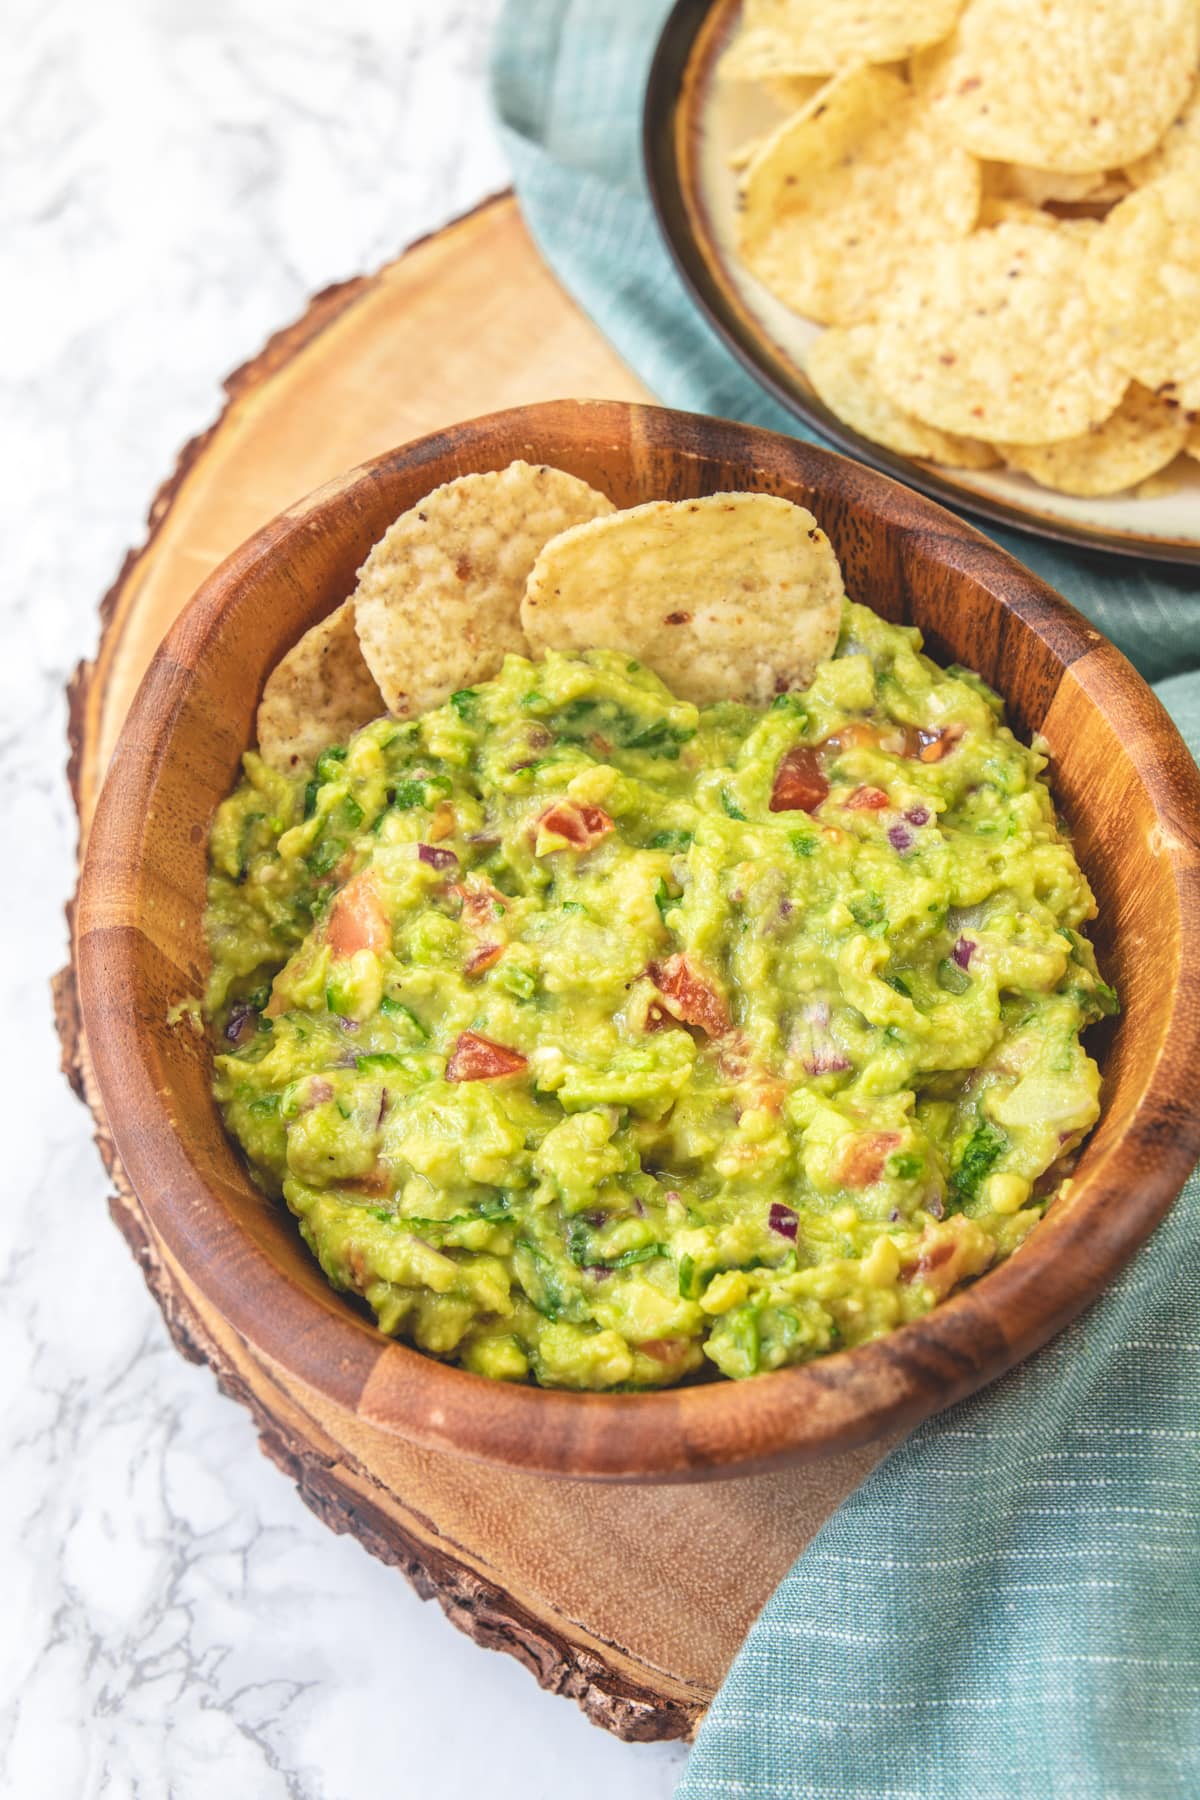 Spicy guacamole served in a wooden bowl with chips.